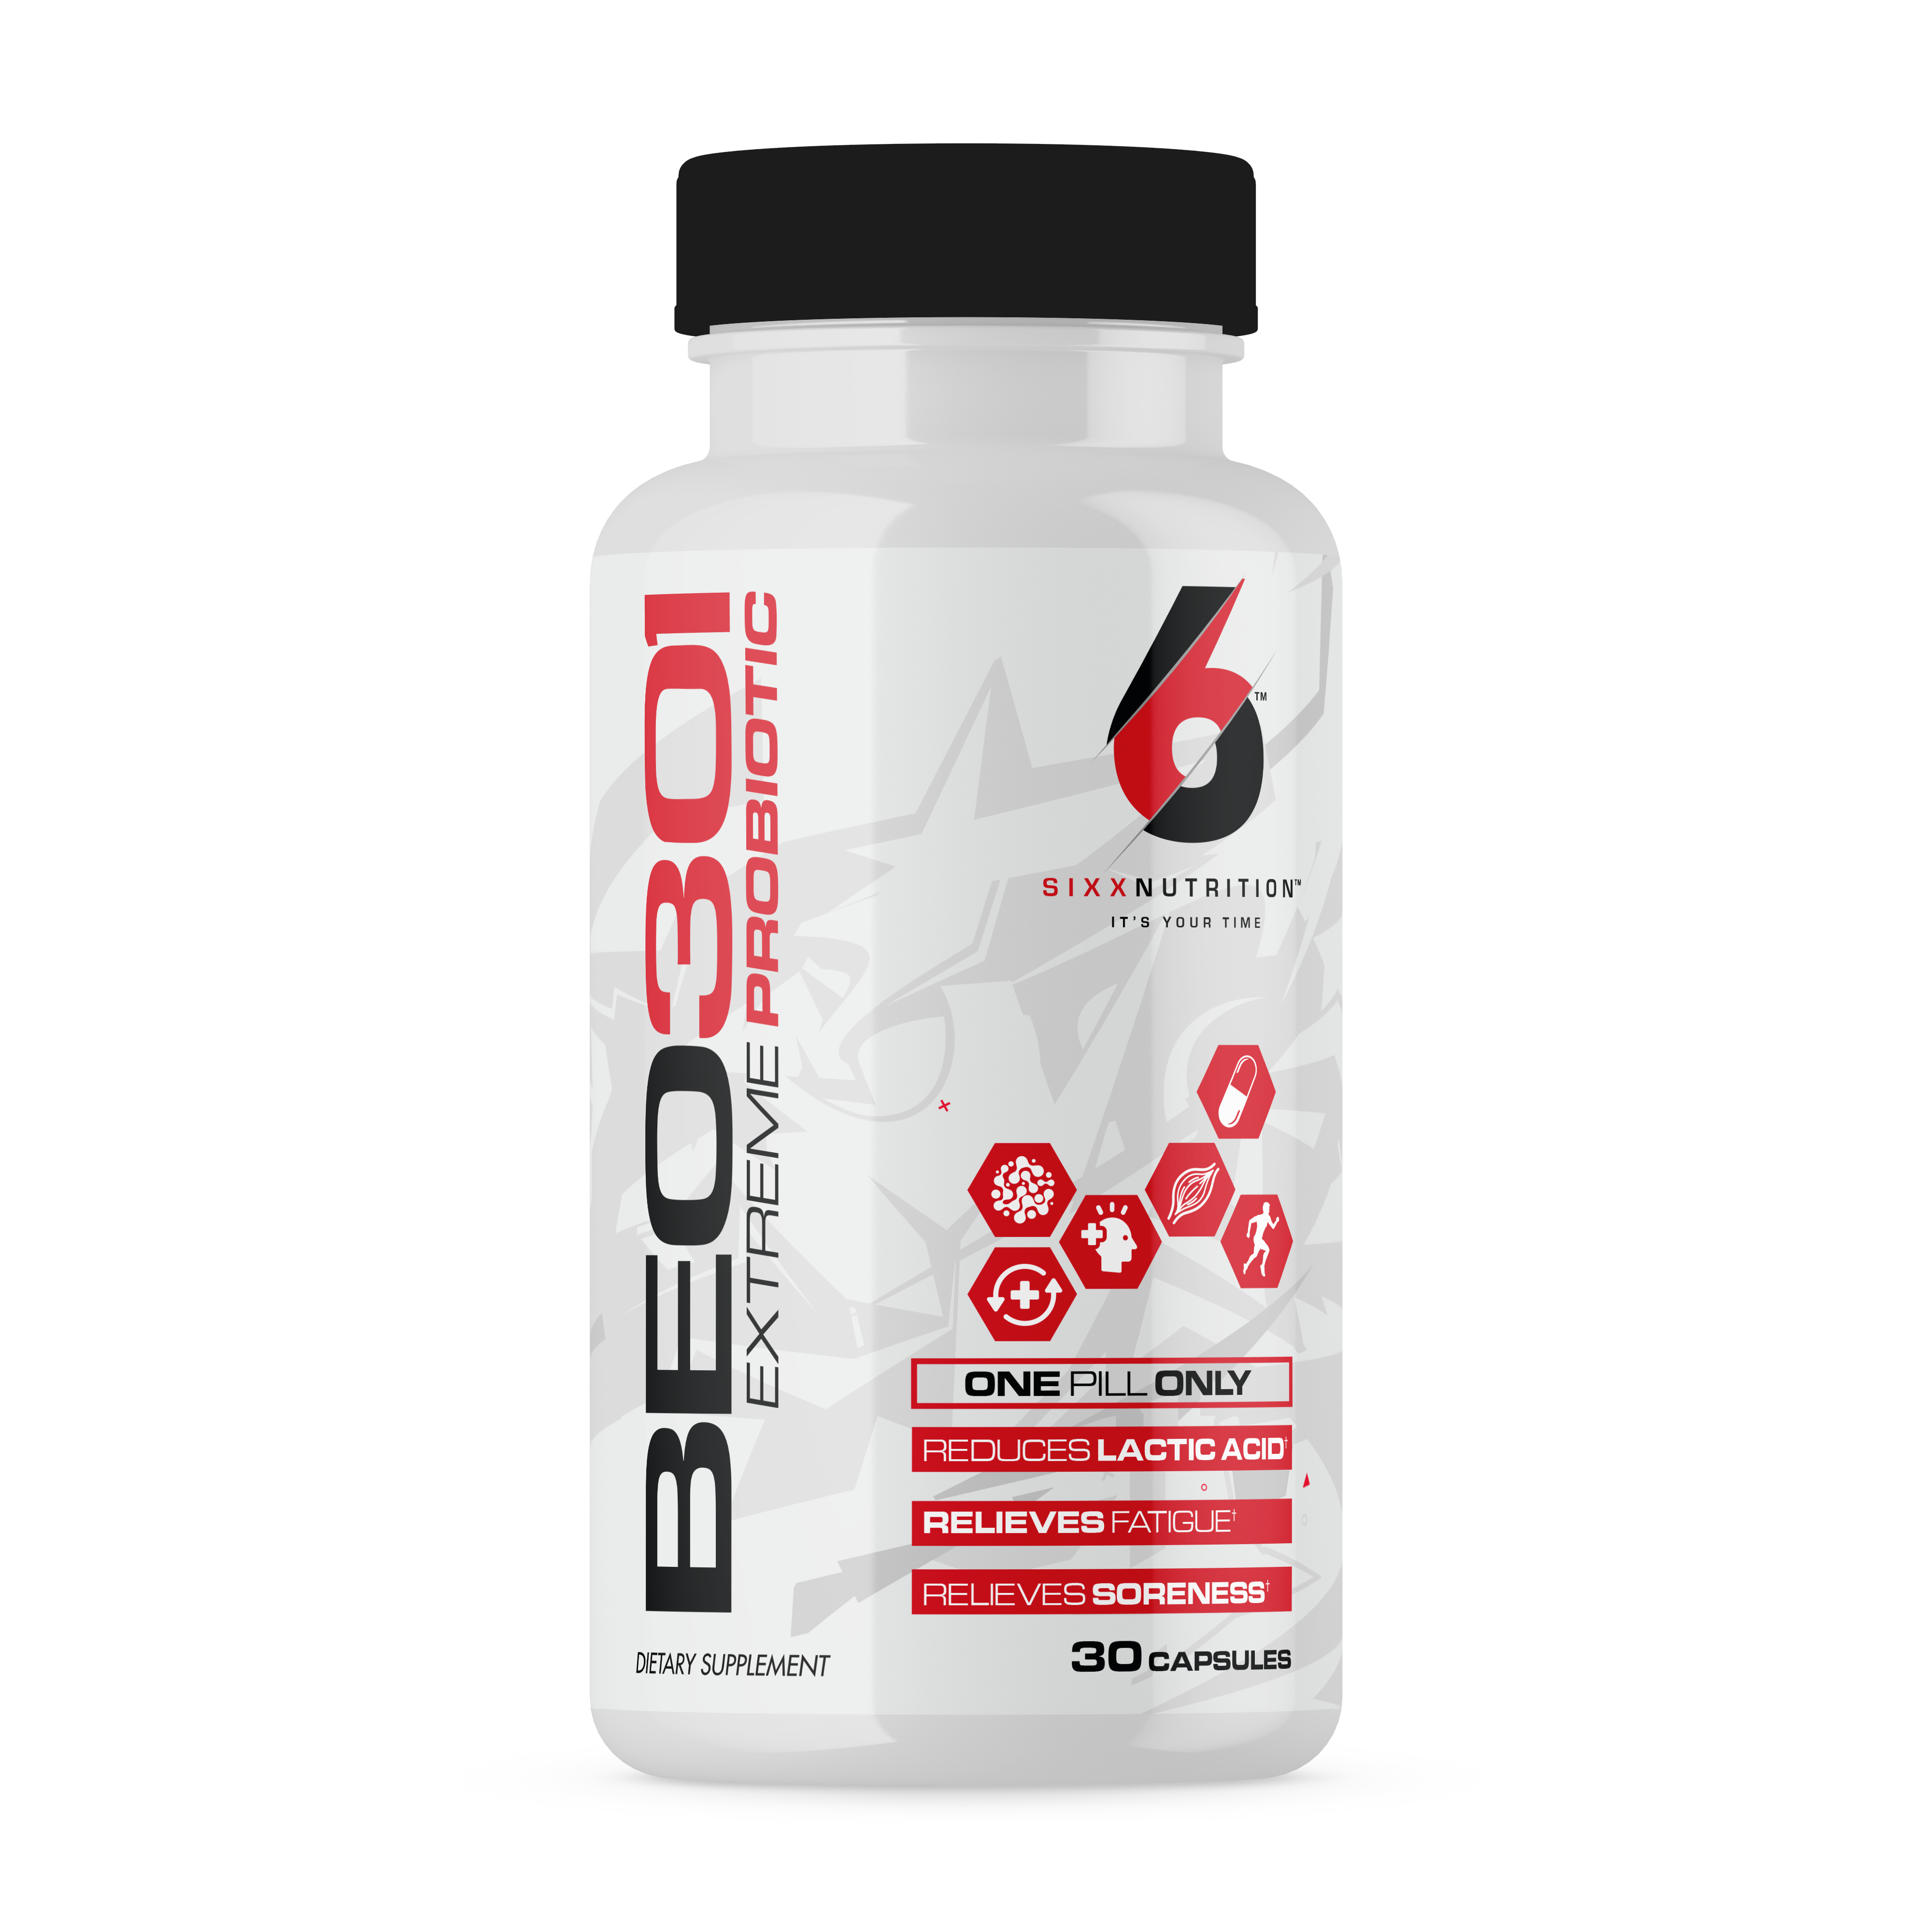 SPORTS PERFORMANCE STRENGTHING, 15 BILLION CFU BE0301 Extreme Probiotic by Sixx Nutrition 1 pill, maintains gut health formulated for athletes. Ingredients BE0301 PROBIOTIC, BEEF PROTEIN, PEA PROTEIN